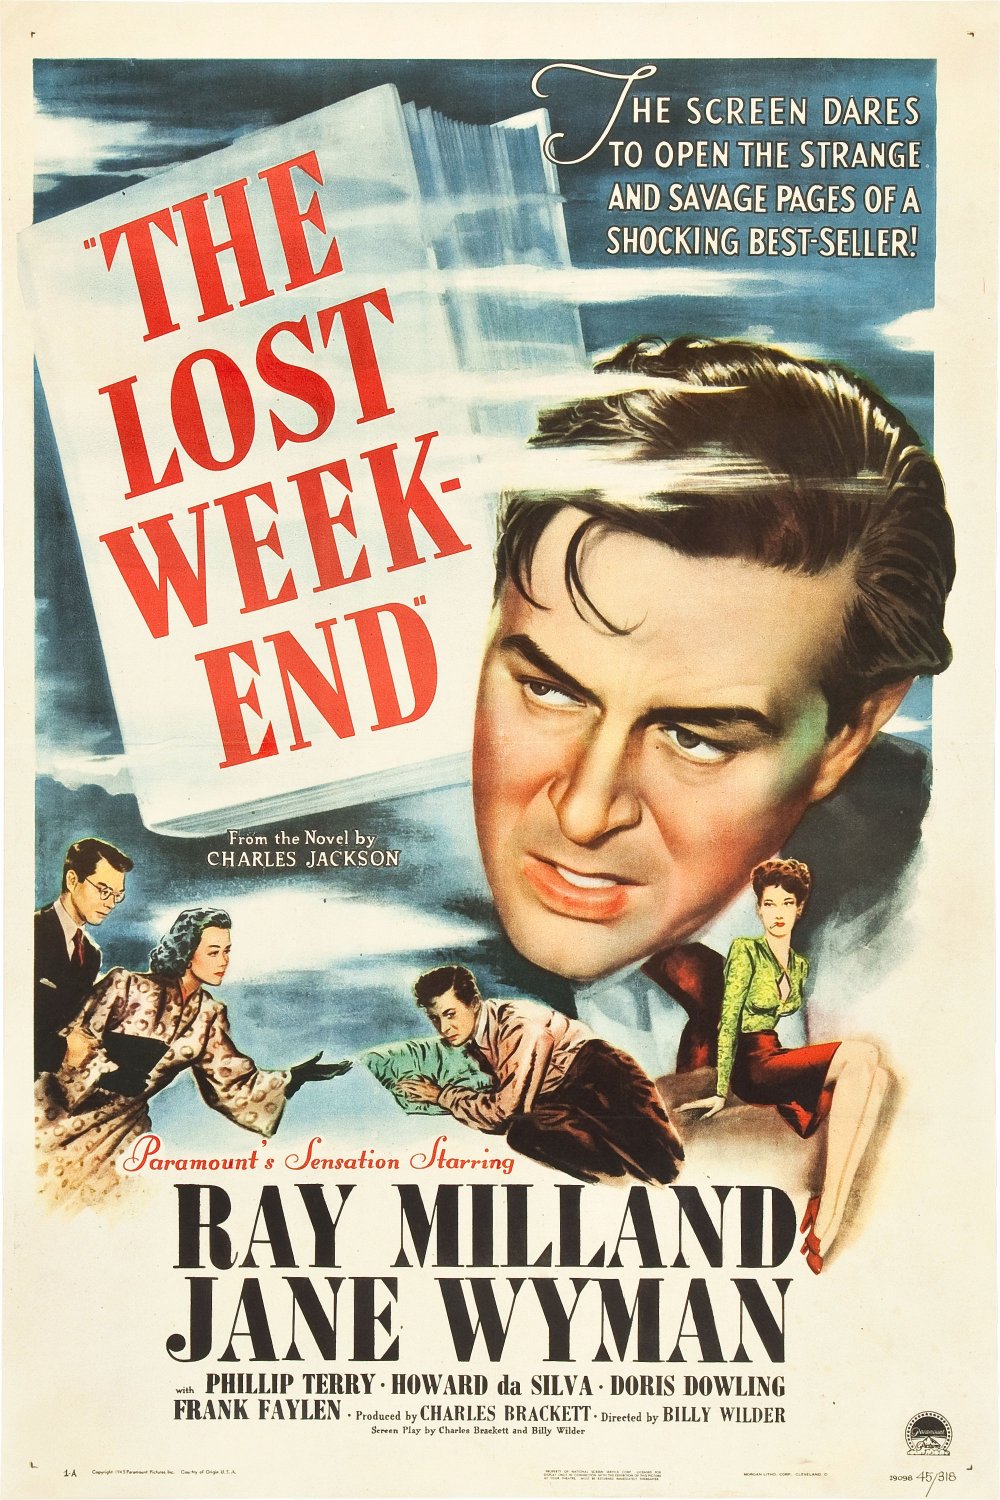 The Lost Weekend (1 of 3) Extra Large Movie Poster Image IMP Awards